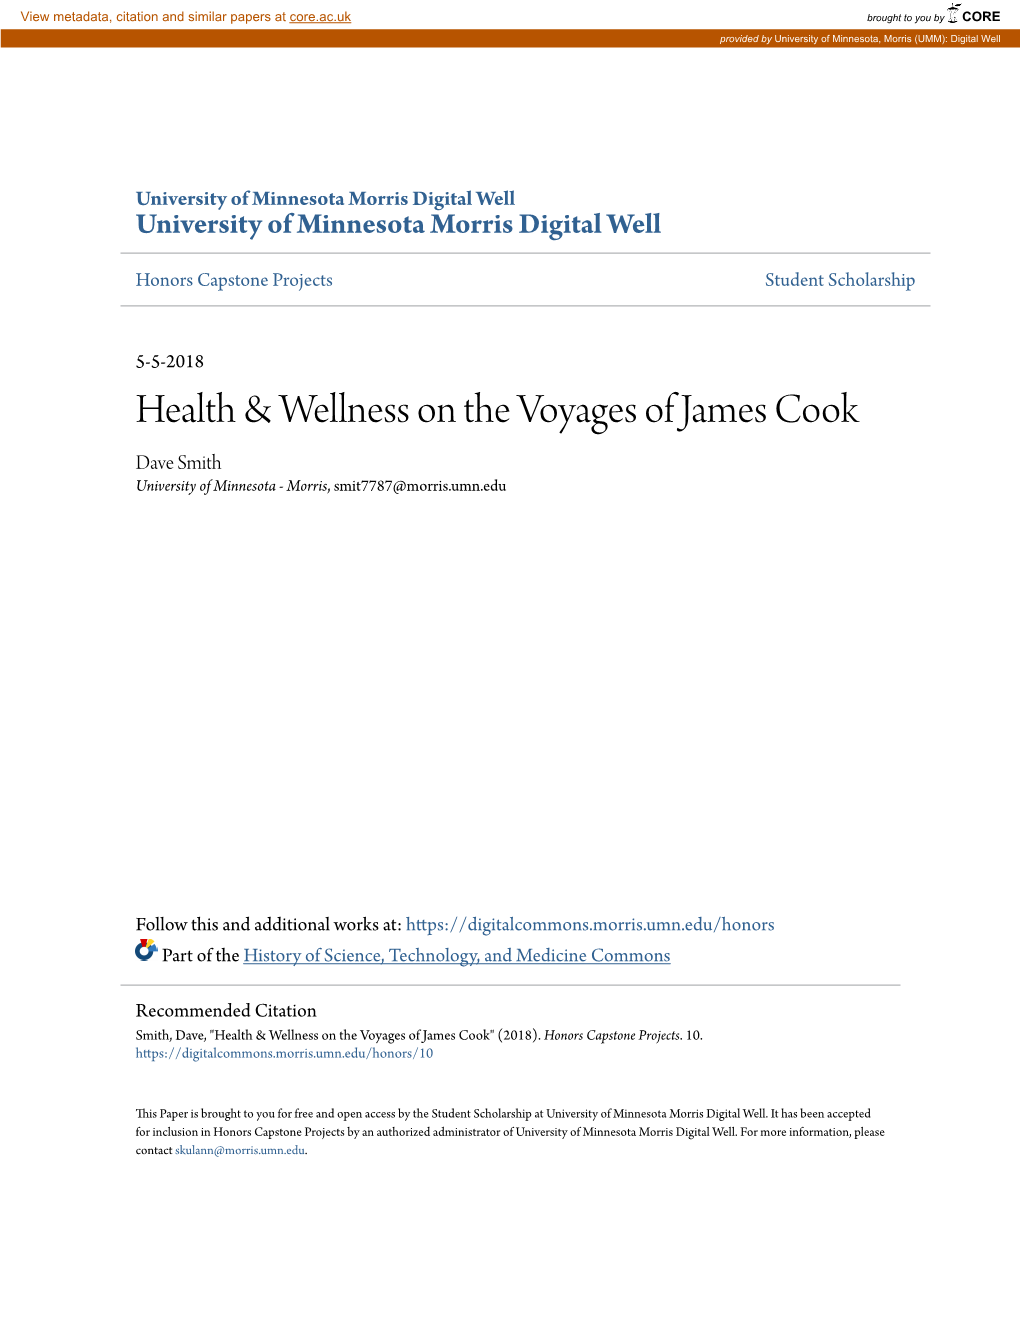 Health & Wellness on the Voyages of James Cook